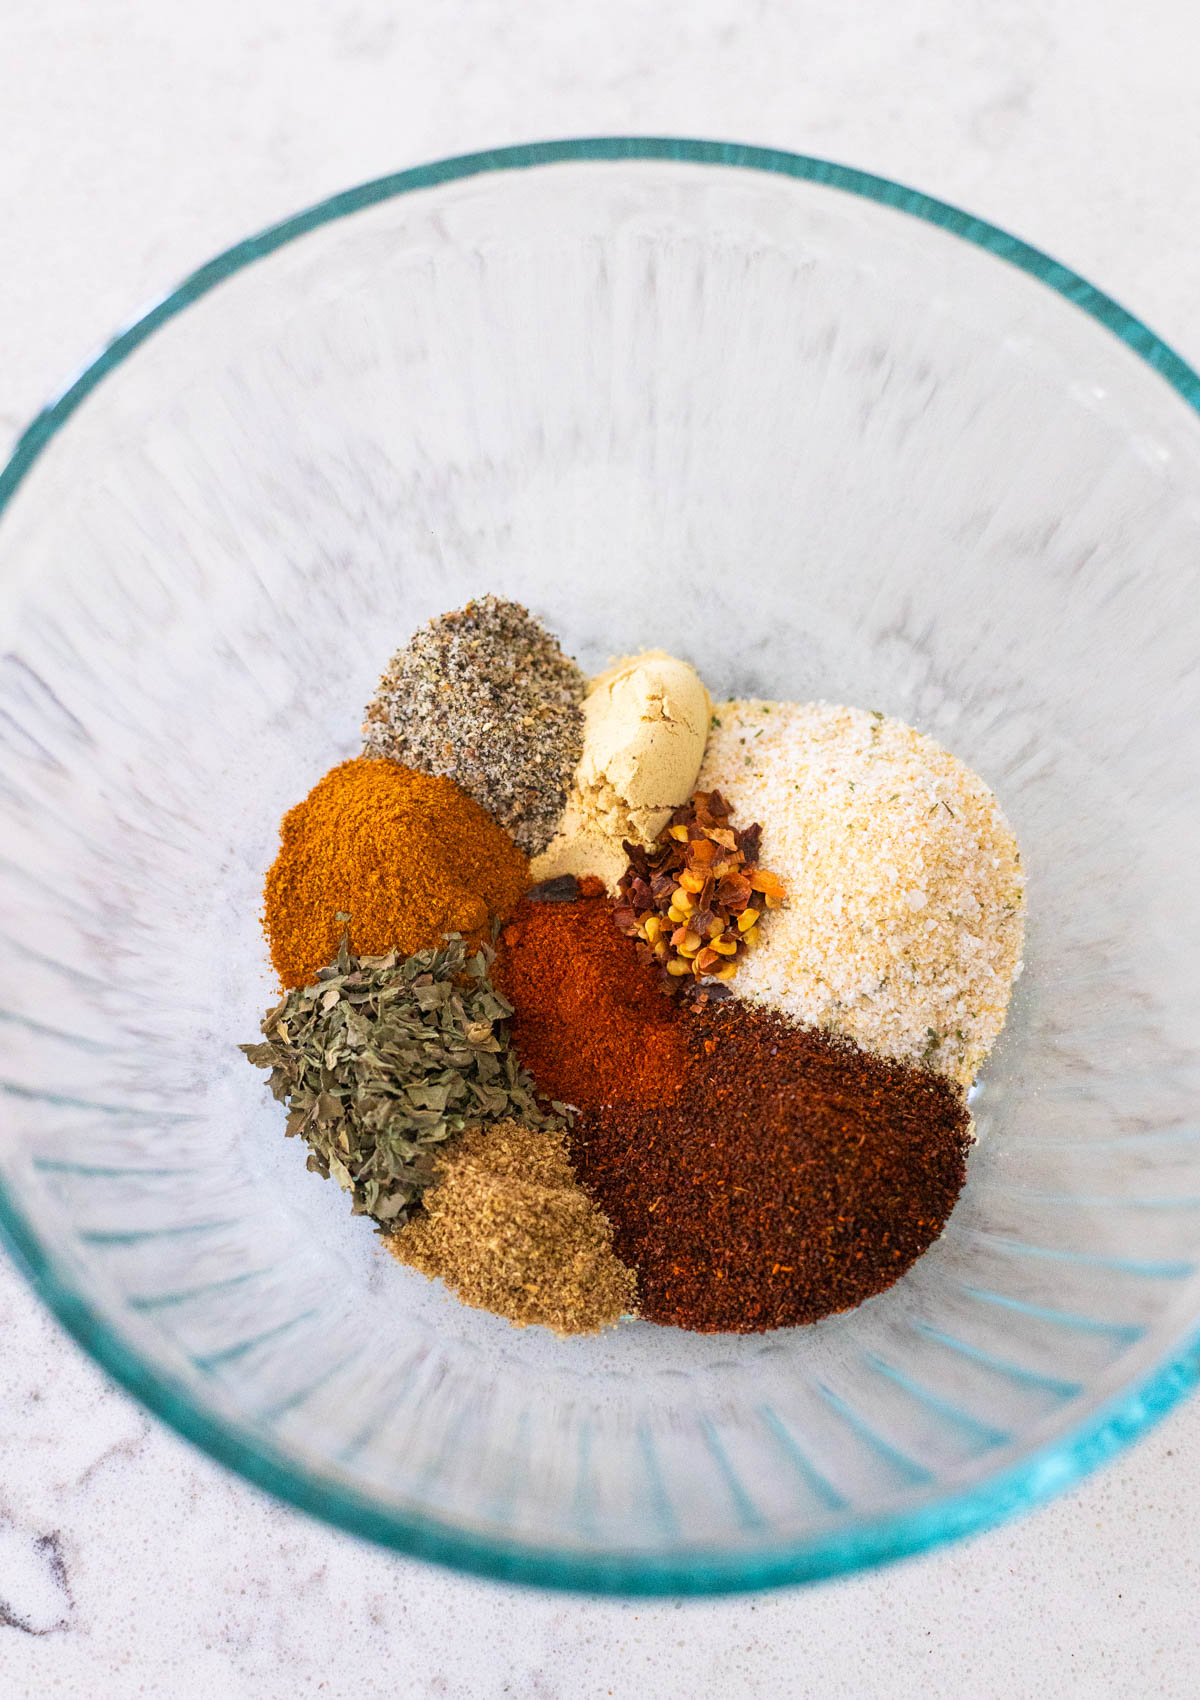 The spices have been measured and added to the mixing bowl.